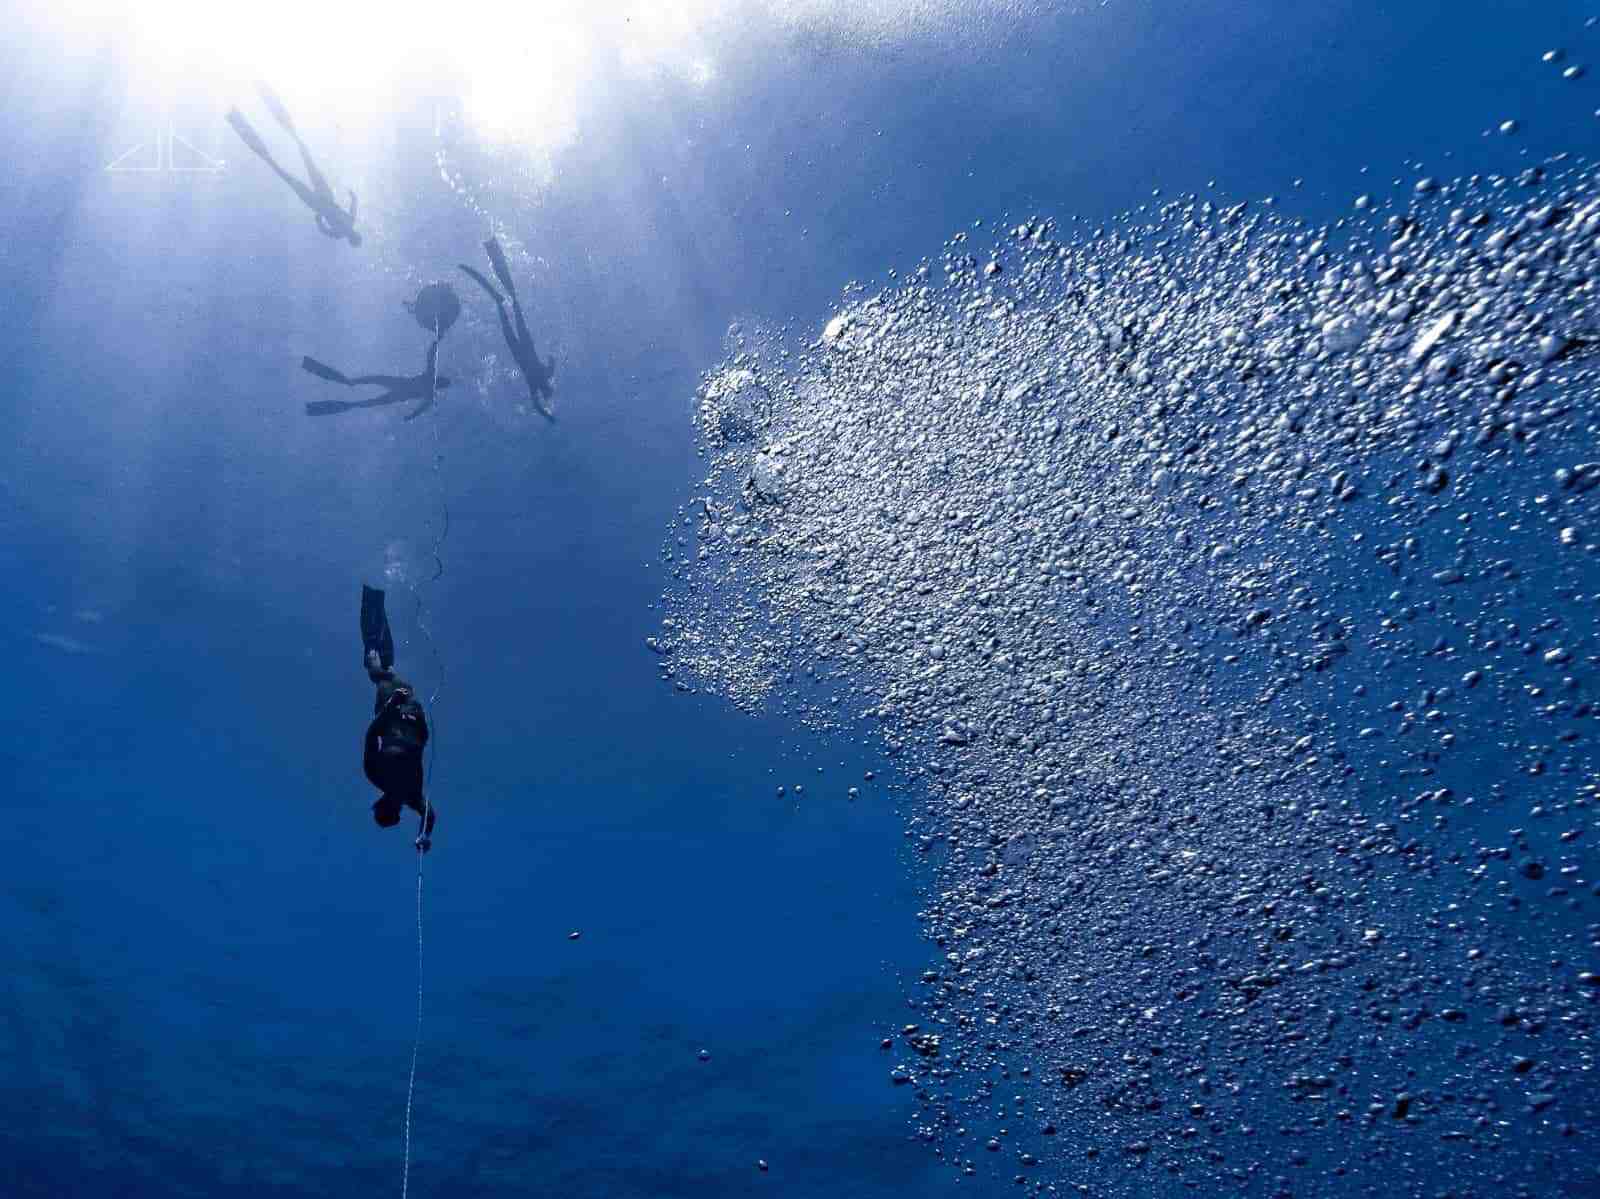 Freediver pulling down the line